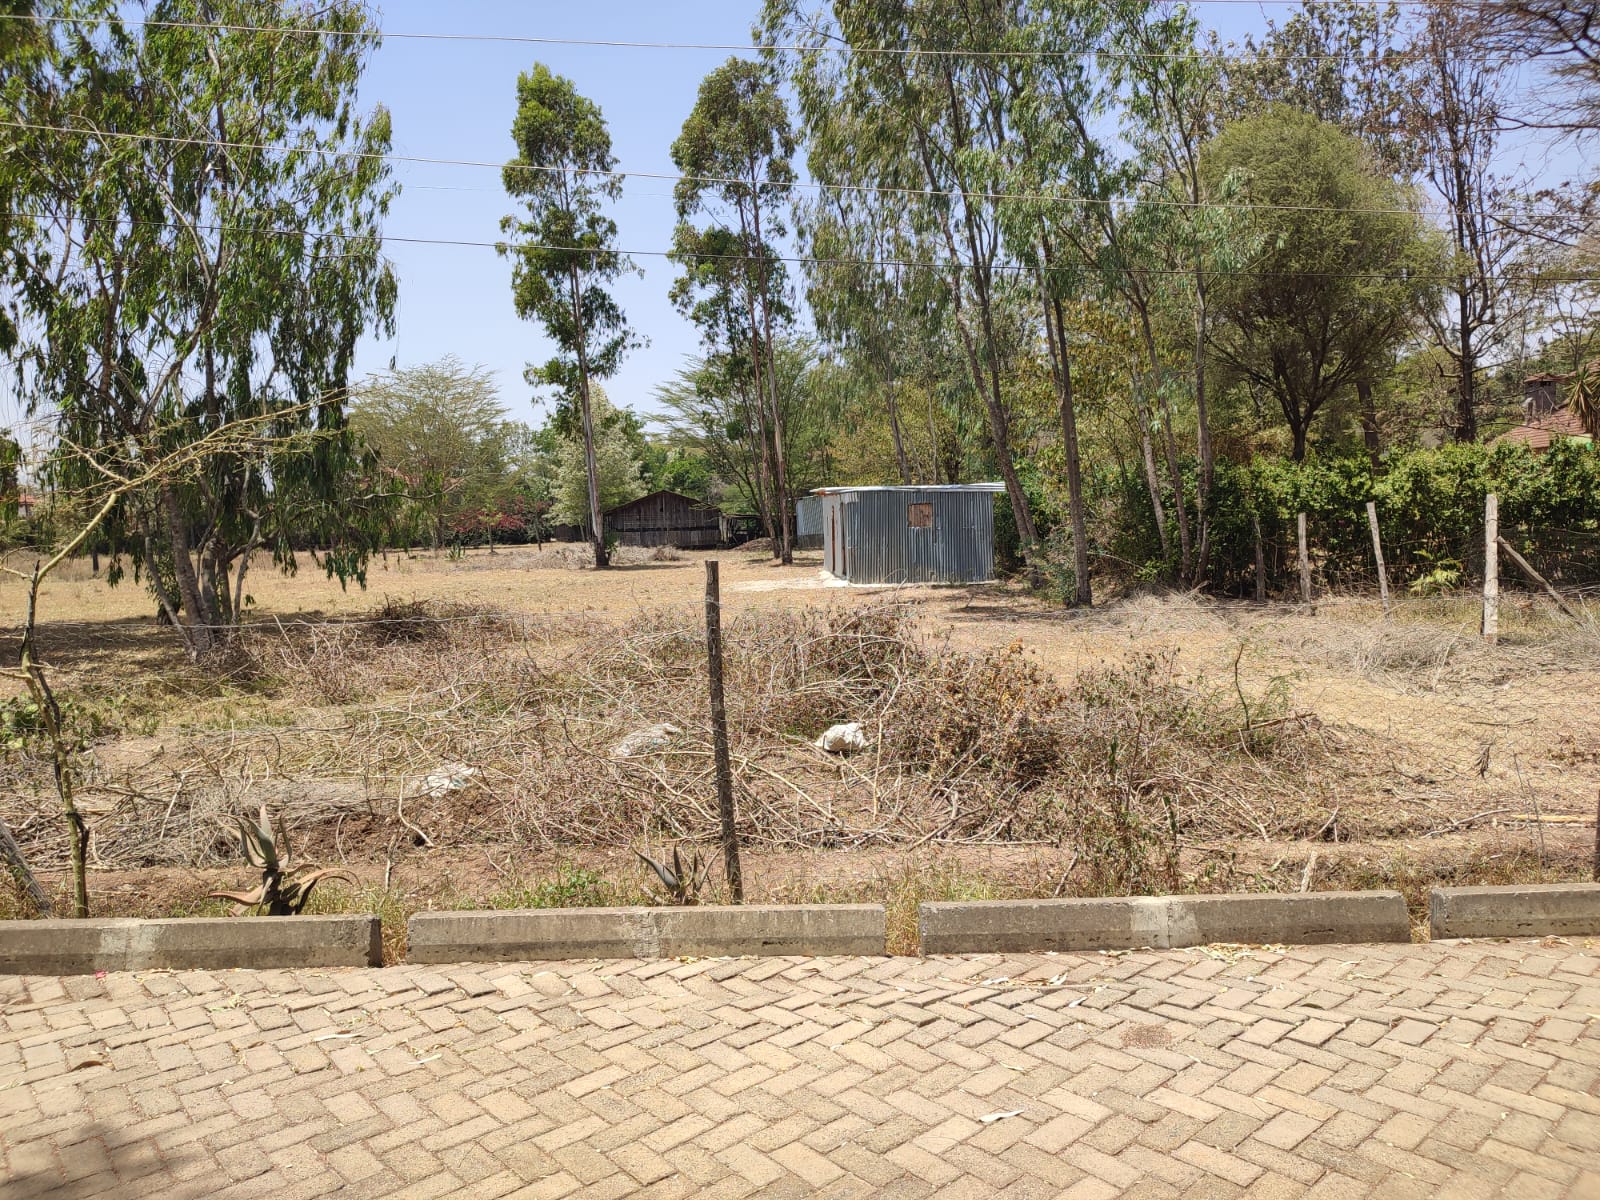 Karen land for sale Bogani Rd 1.75 ACRES Ready Title Deed Exclusive!